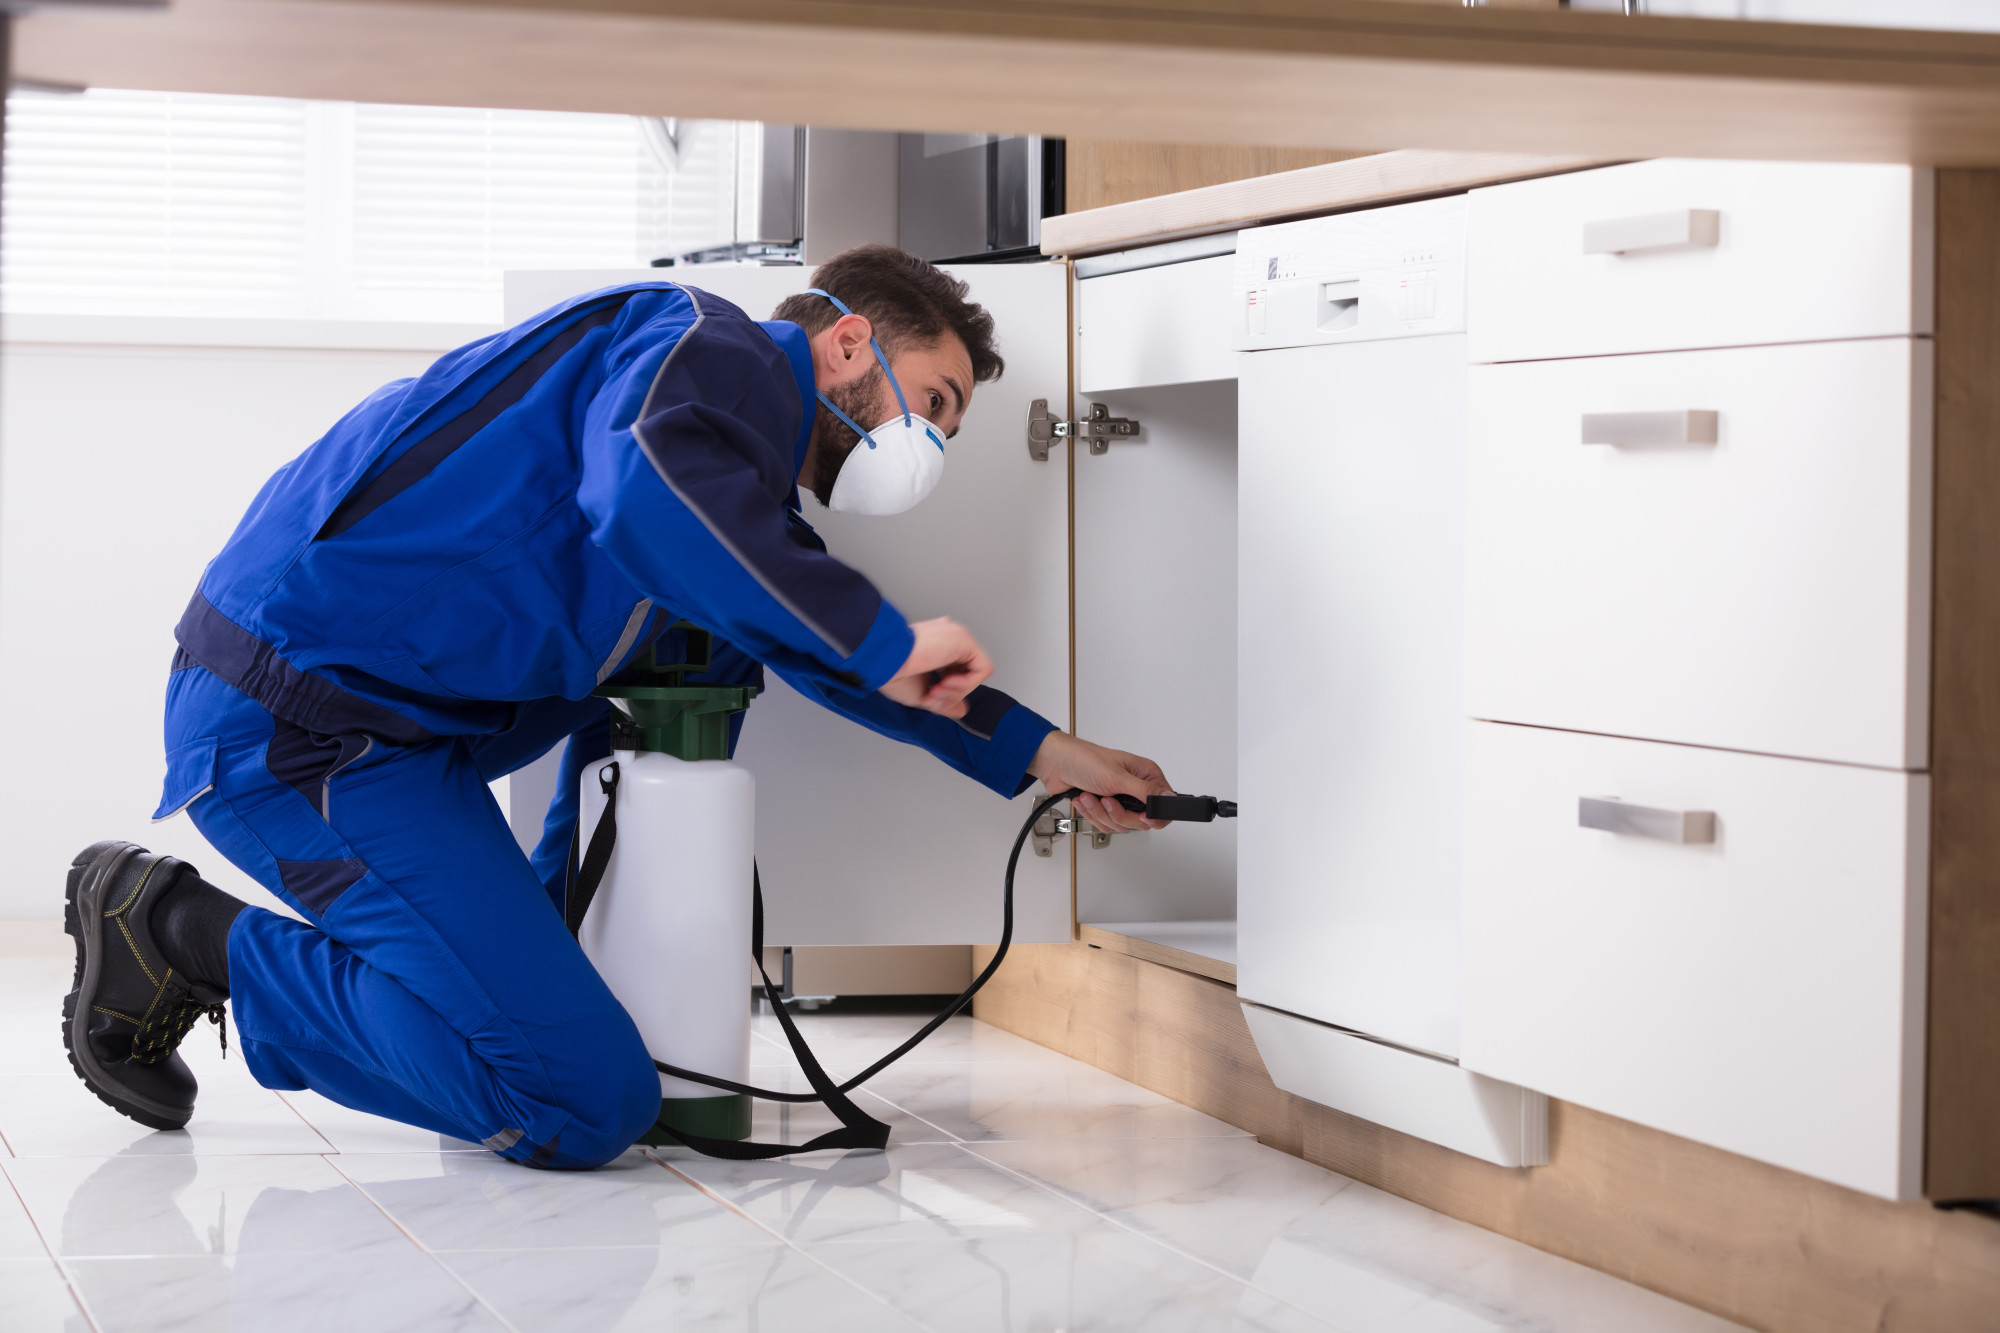 Are you looking for pest control services that you can count on? Click here for five practical tips for hiring a local pest control company.